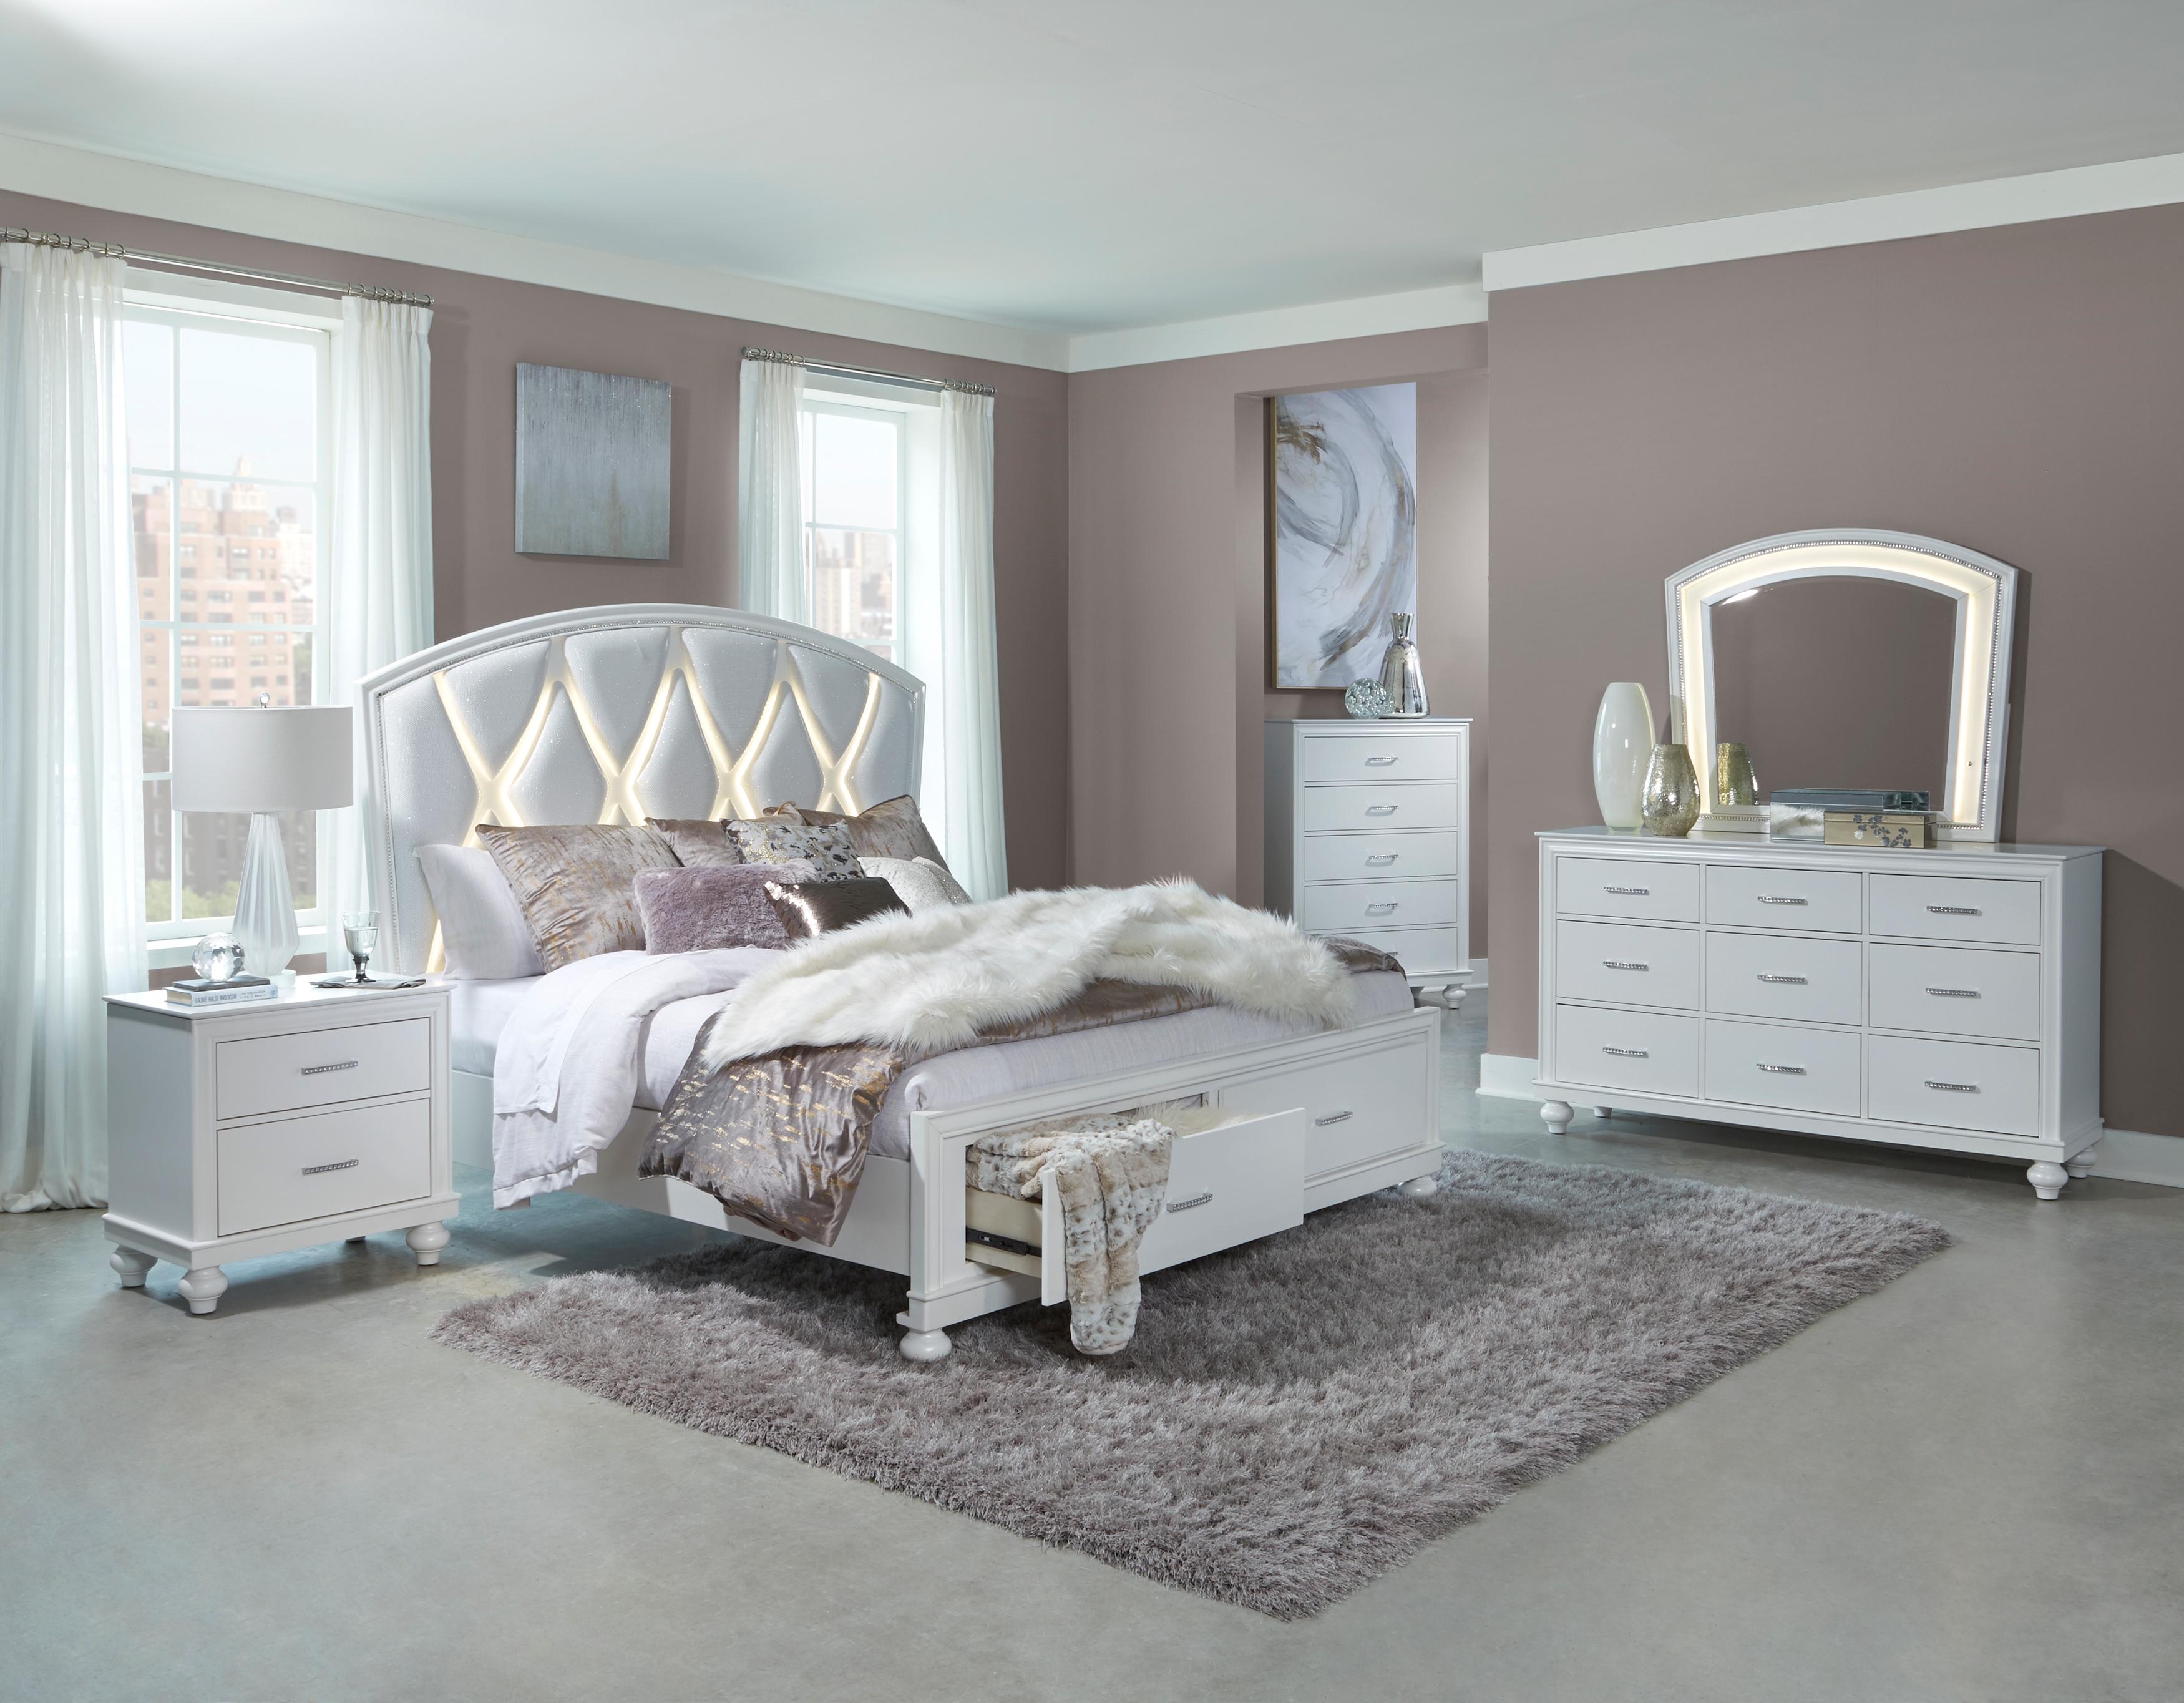 Modern Platform Bedroom Set Aria Collection King Platform Bedroom Set 3PCS 1436WK-1EK-EK-3PCS 1436WK-1EK-EK-3PCS in White Finish Faux Leather